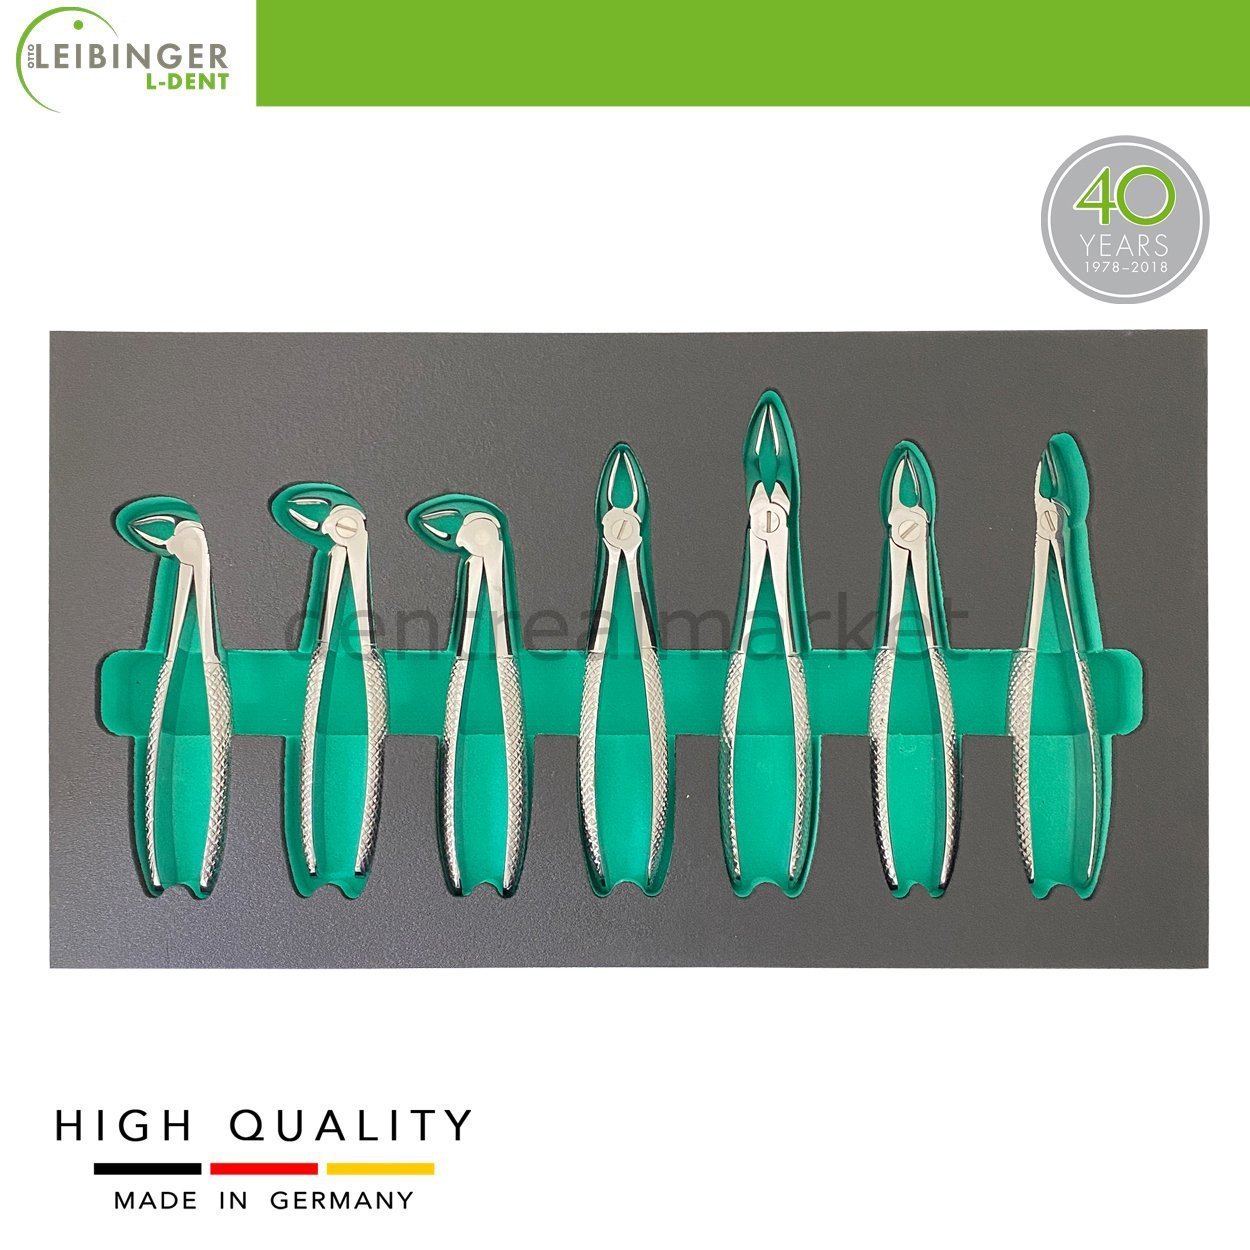 DentrealStore - Leibinger Child Tooth Extraction Forceps Kit - English Pattern